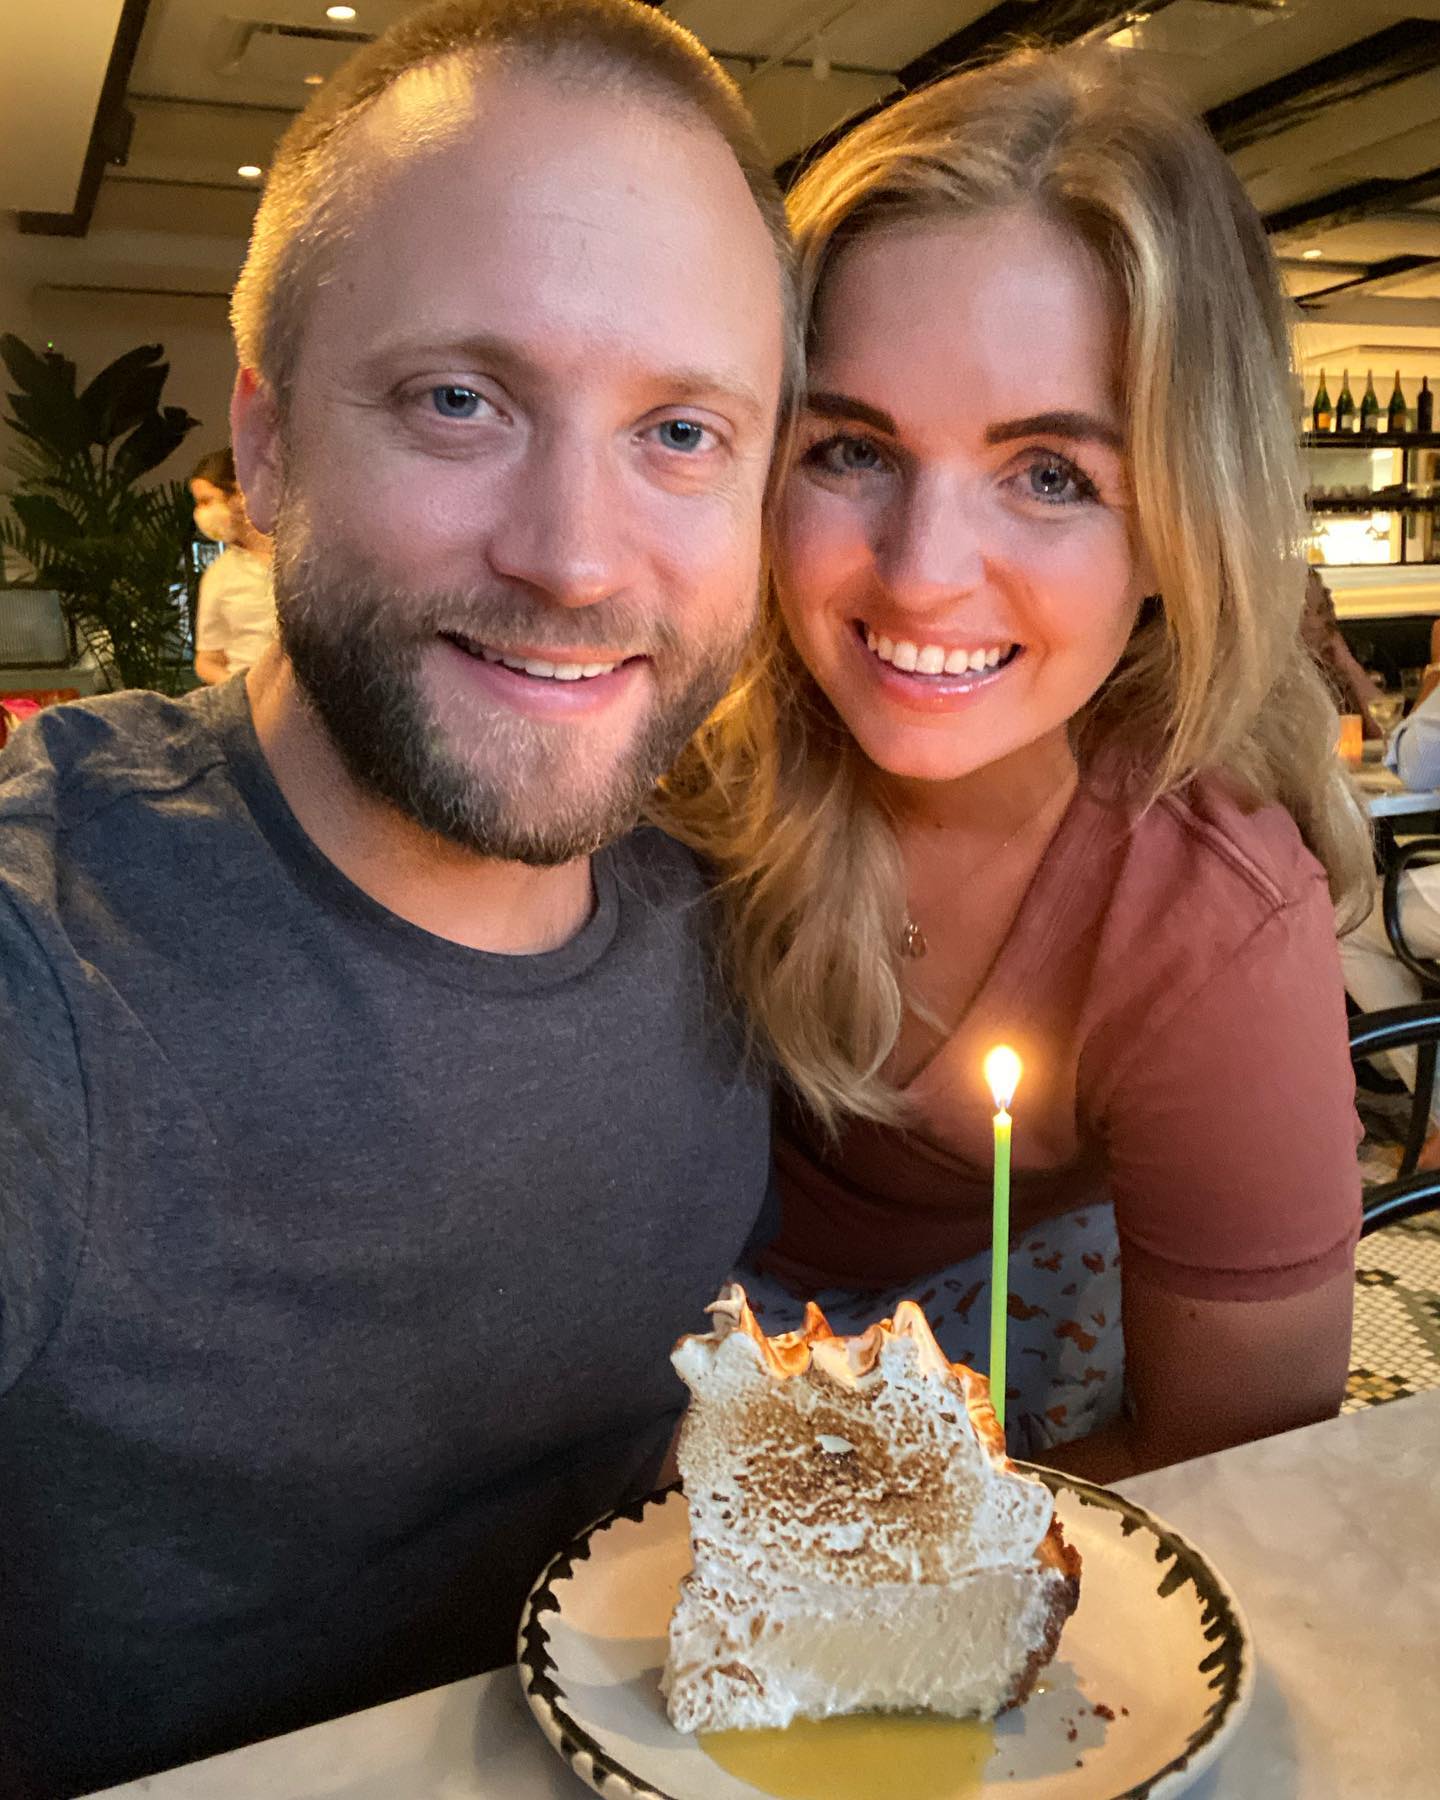 Yesterday was my 37th birthday. (Let’s not talk about how I’m basically 40 if you round up). My wife and I celebrated and laughed and talked about how much life has changed in the 7 years since we’ve known each other. How much we’ve grown! 

Per usual, she posed a scenario and asked an engaging question: “think about how much life has changed in the 7 years prior to us meeting. If you could talk to your 23 year old self, what would you say?” I would tell myself you’ll be married to a beautiful woman with amazing kids... And you’ll have your own successful business. To which my 23 year old self would undoubtedly reply “NO WAY I’ll have my own business, that scares me. Too risky.” It was a reminder of how much God has led and strengthened my life, turning my FEARS into COURAGE. My wife is a person of beauty and fun but also challenge and reflection and I’m incredibly grateful for this question and ultimately, that God saw fit to bring us together. #bettertogether